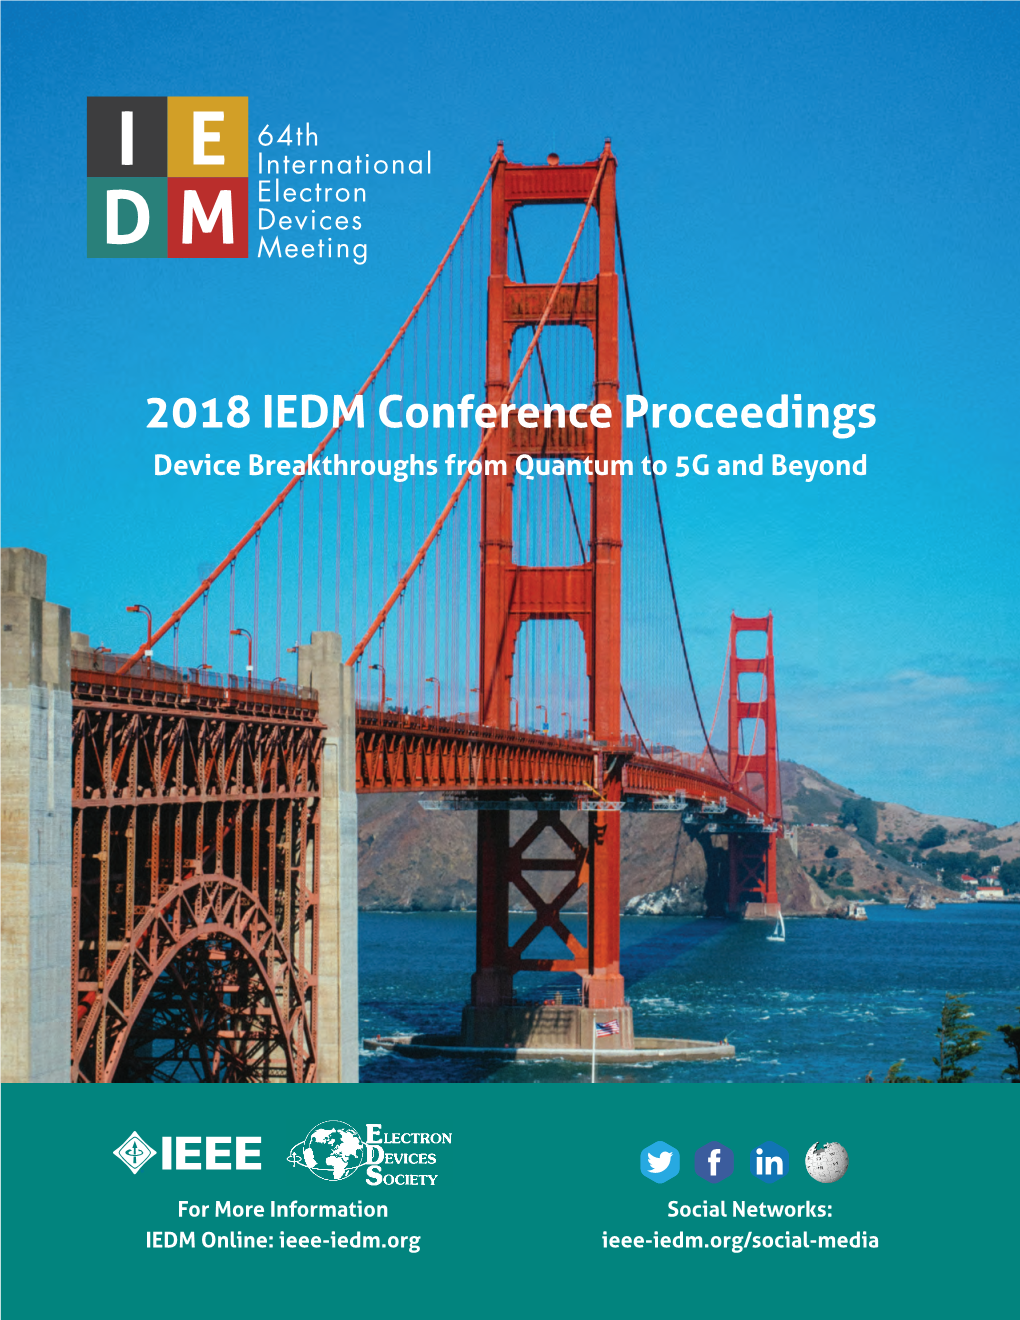 2018 IEDM Conference Proceedings Device Breakthroughs from Quantum to 5G and Beyond